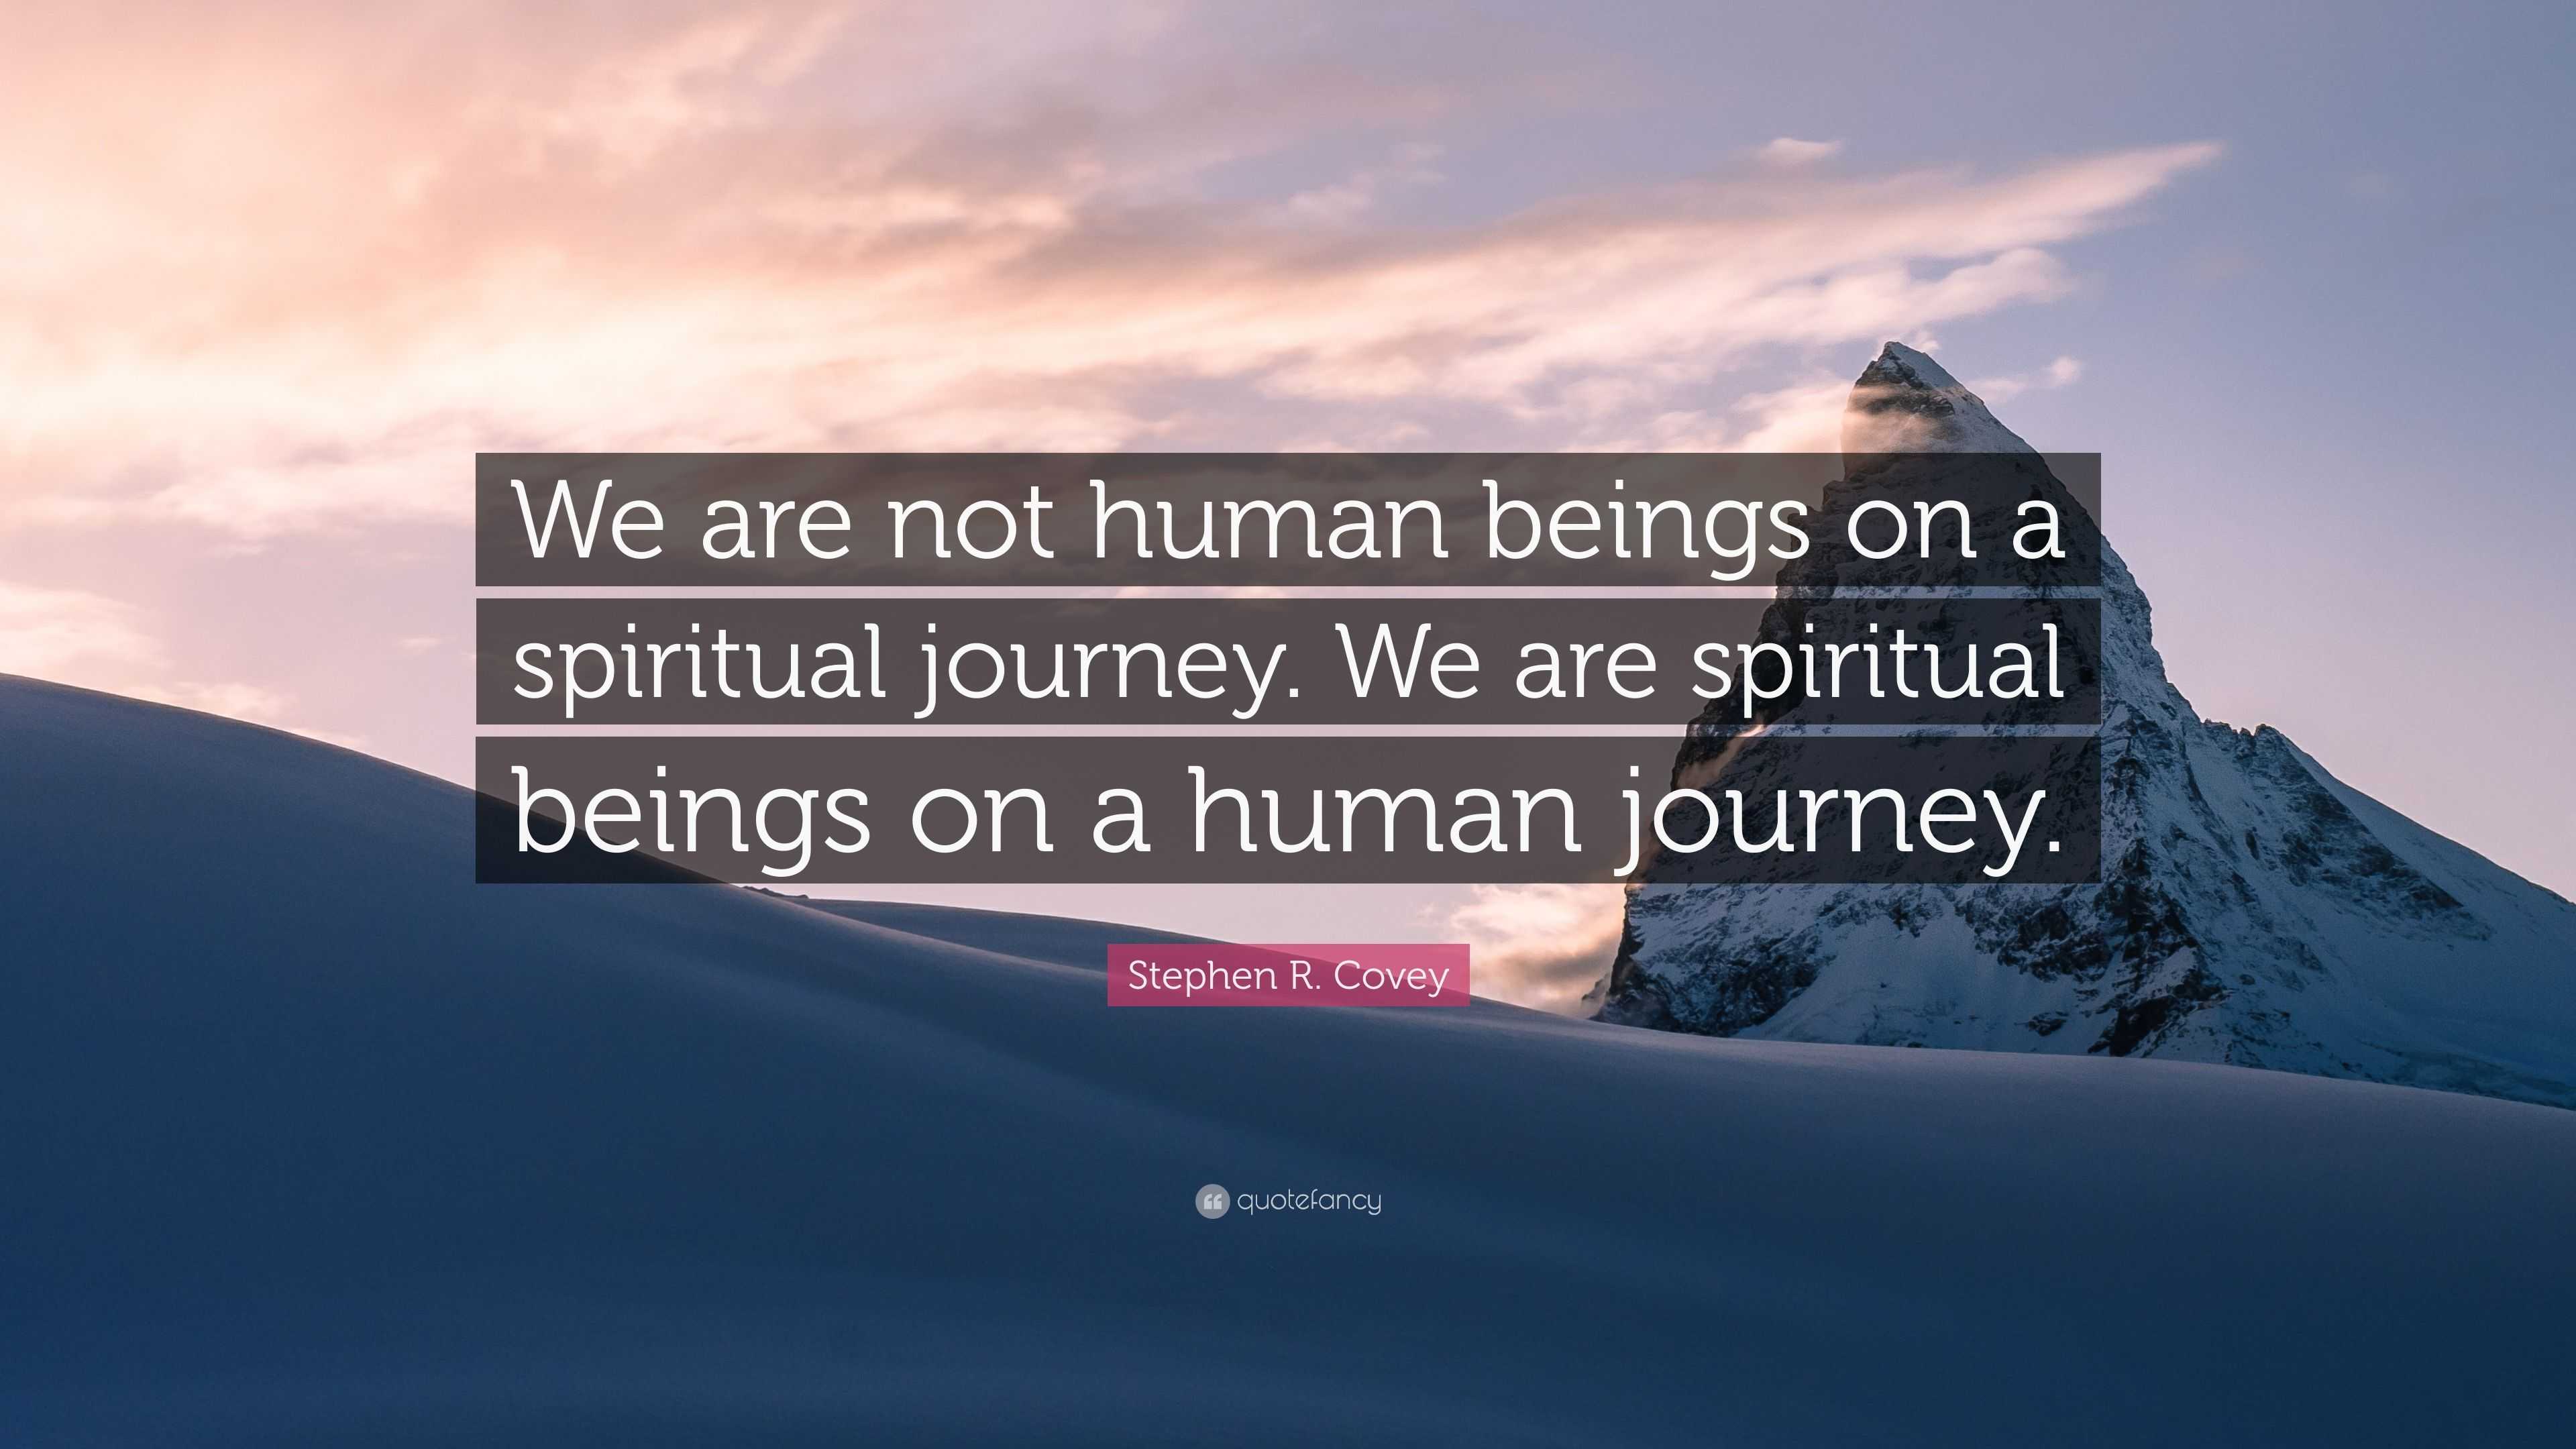 we are not human beings on a spiritual journey